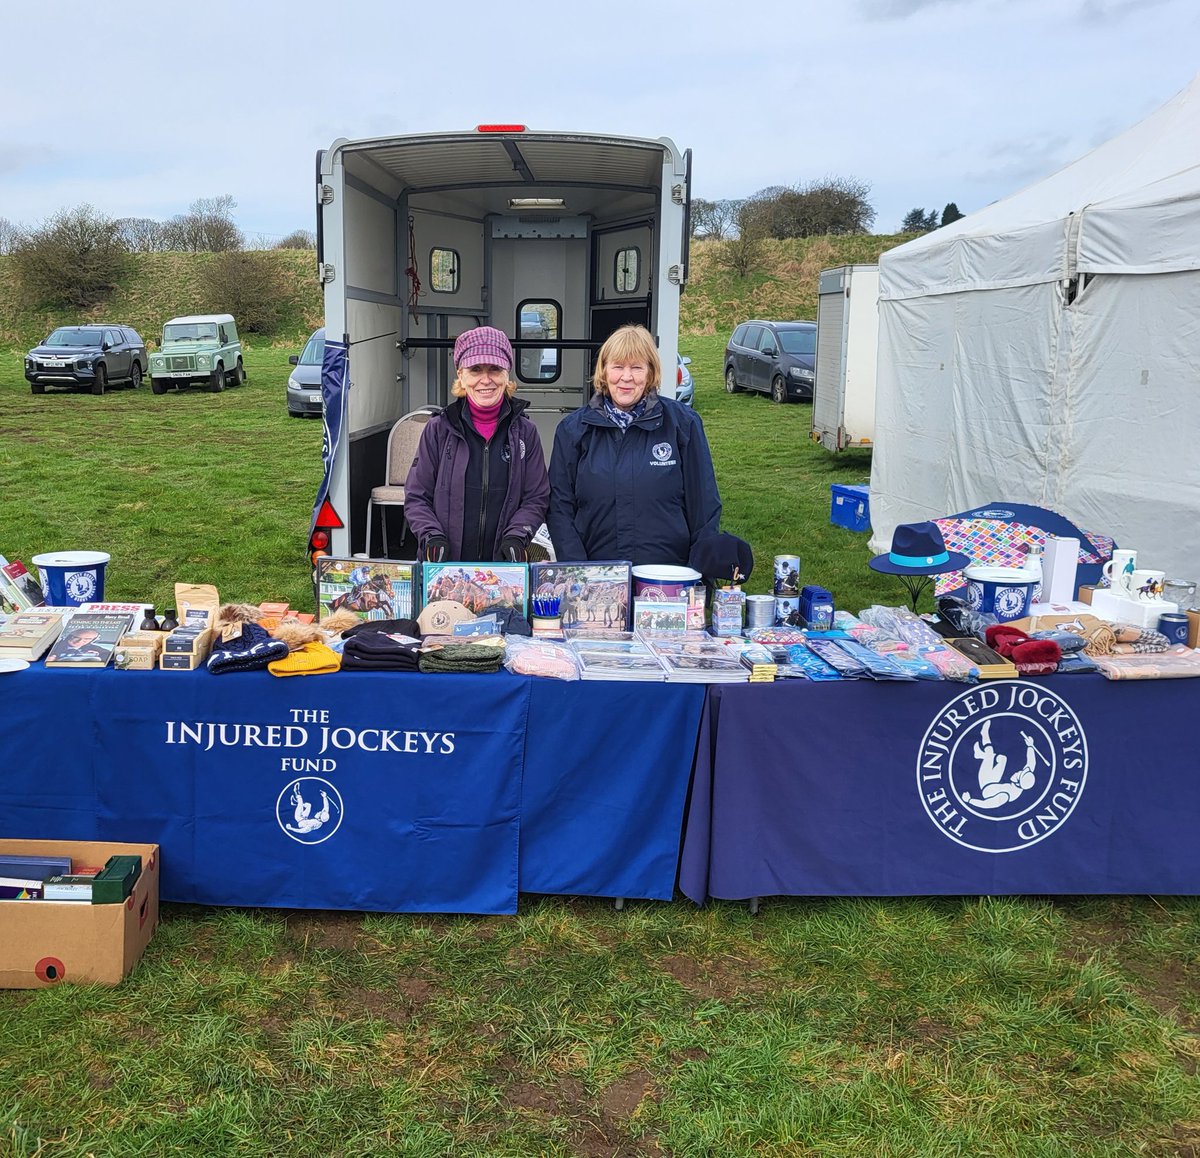 All ready to go with the @IJF_official stand @GoPointing at Yorksire Jockeys Meeting at Charm Park today in aid of the @IJF_official